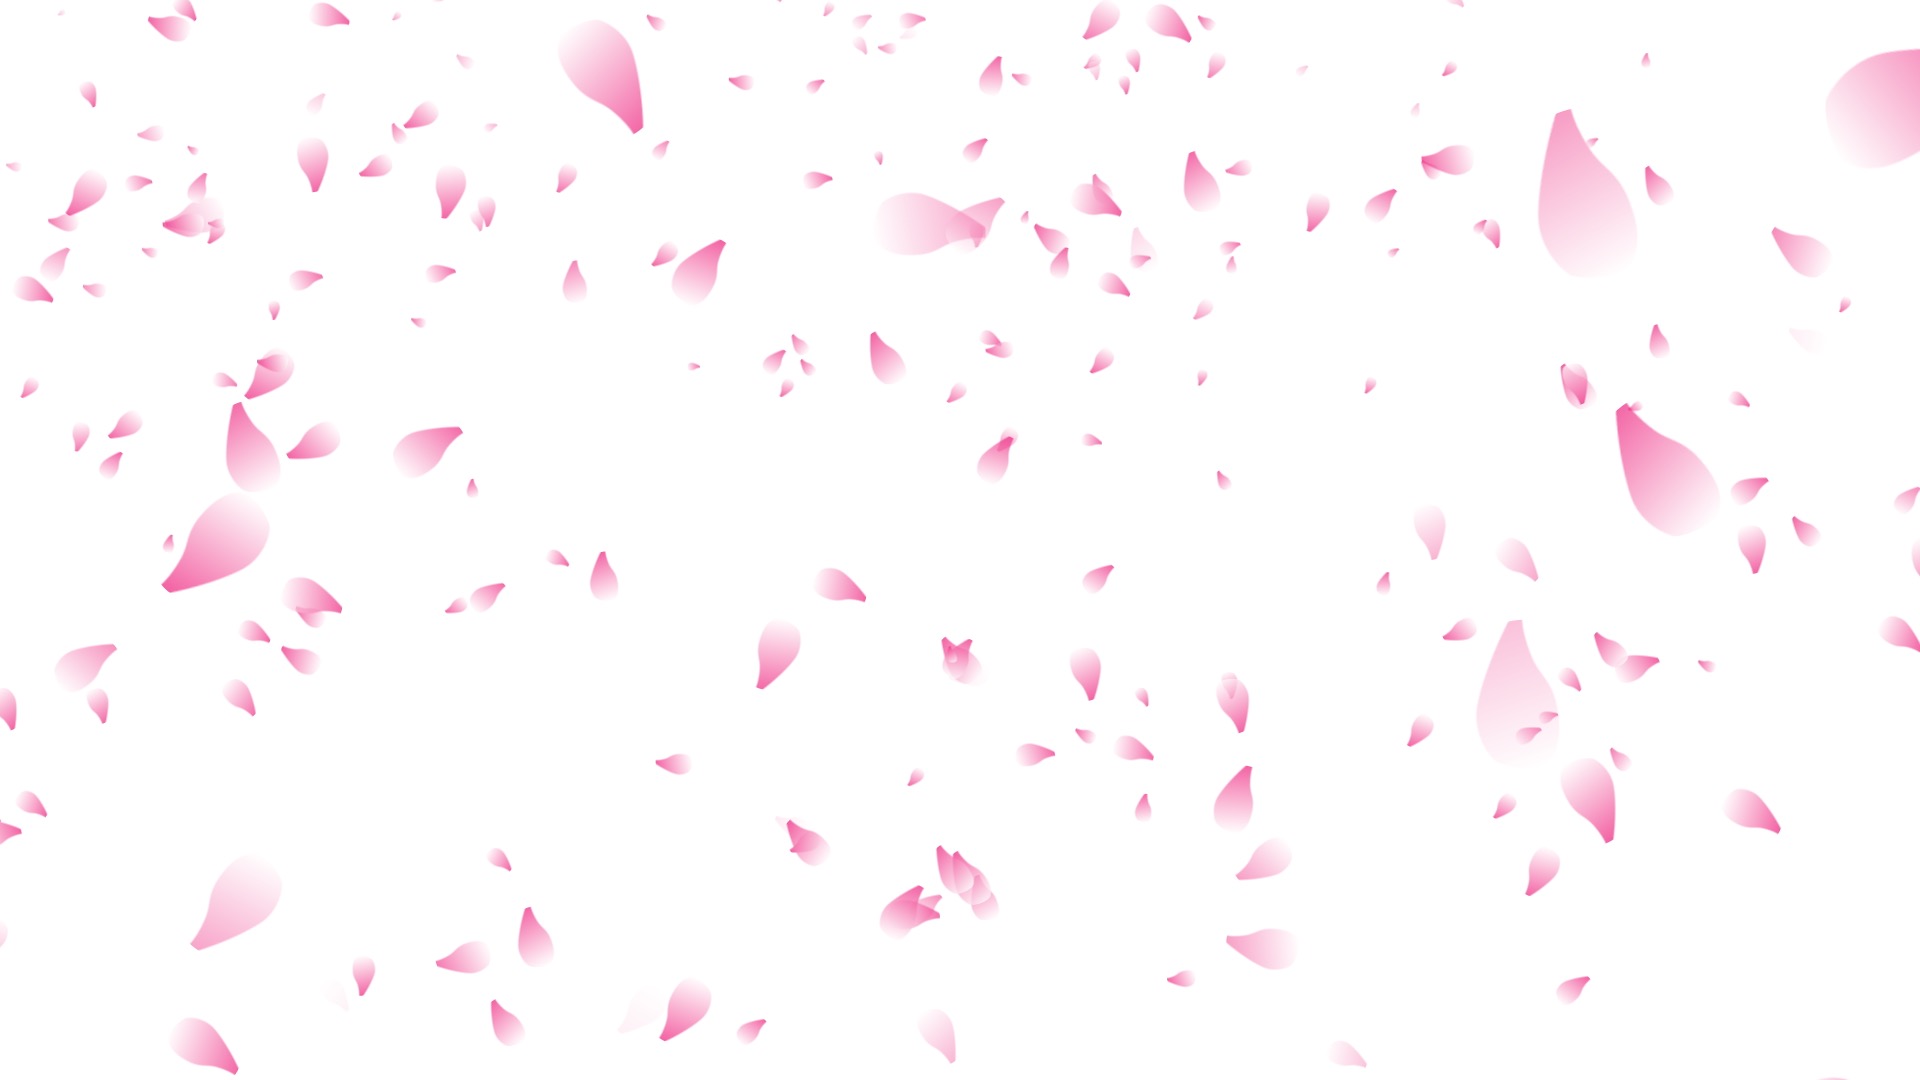 Cherry blossom petals falling background stock (white background)